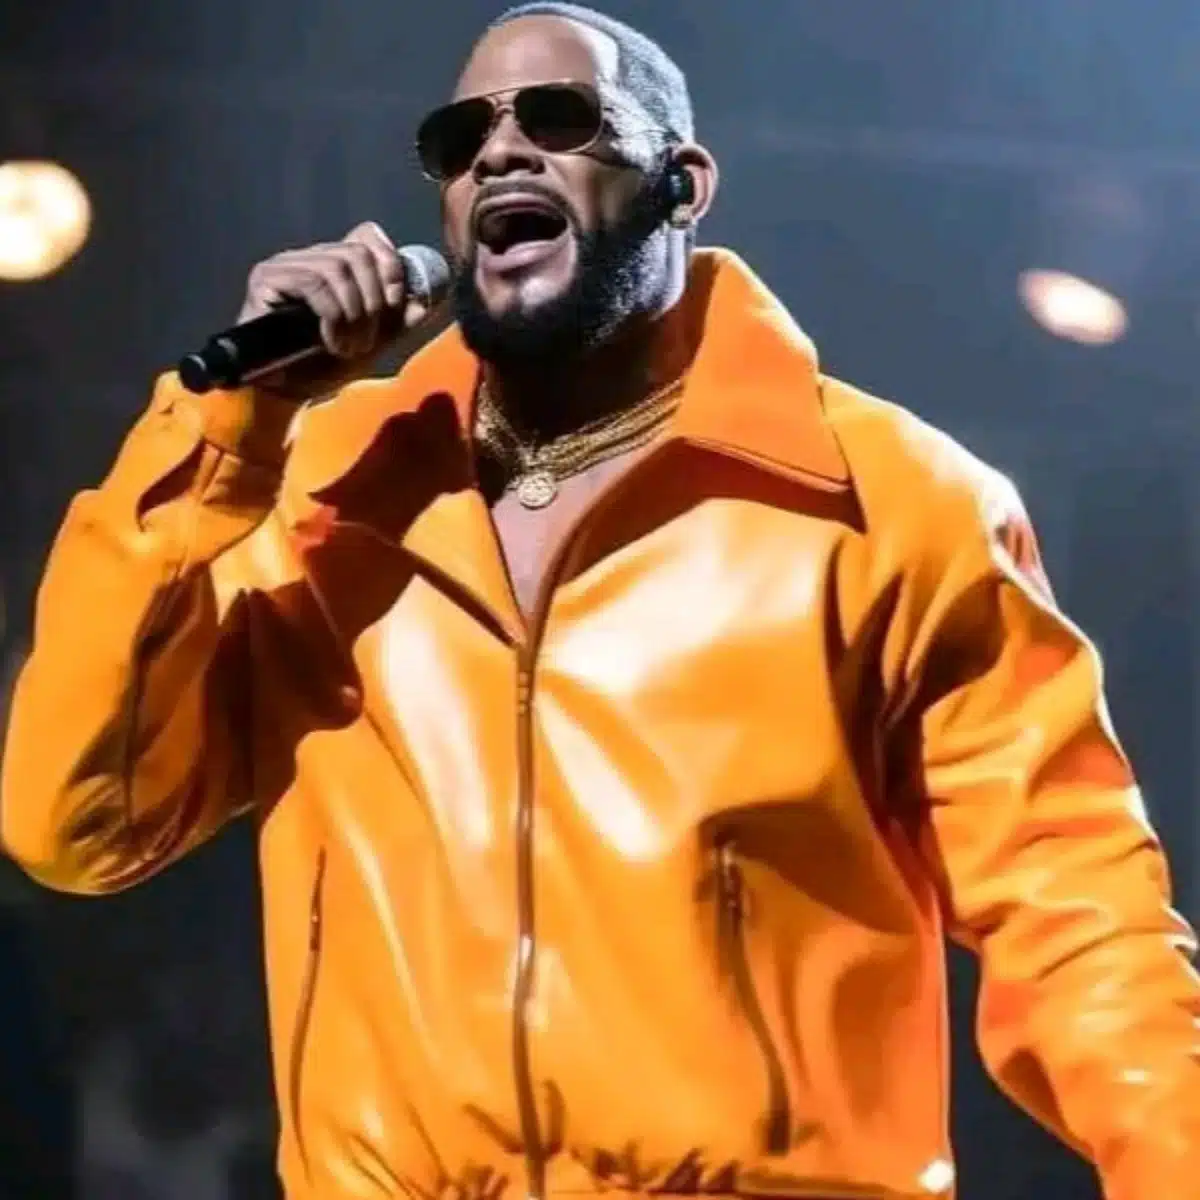 R Kelly Releases New Song “Shut Up” from Behind Bars